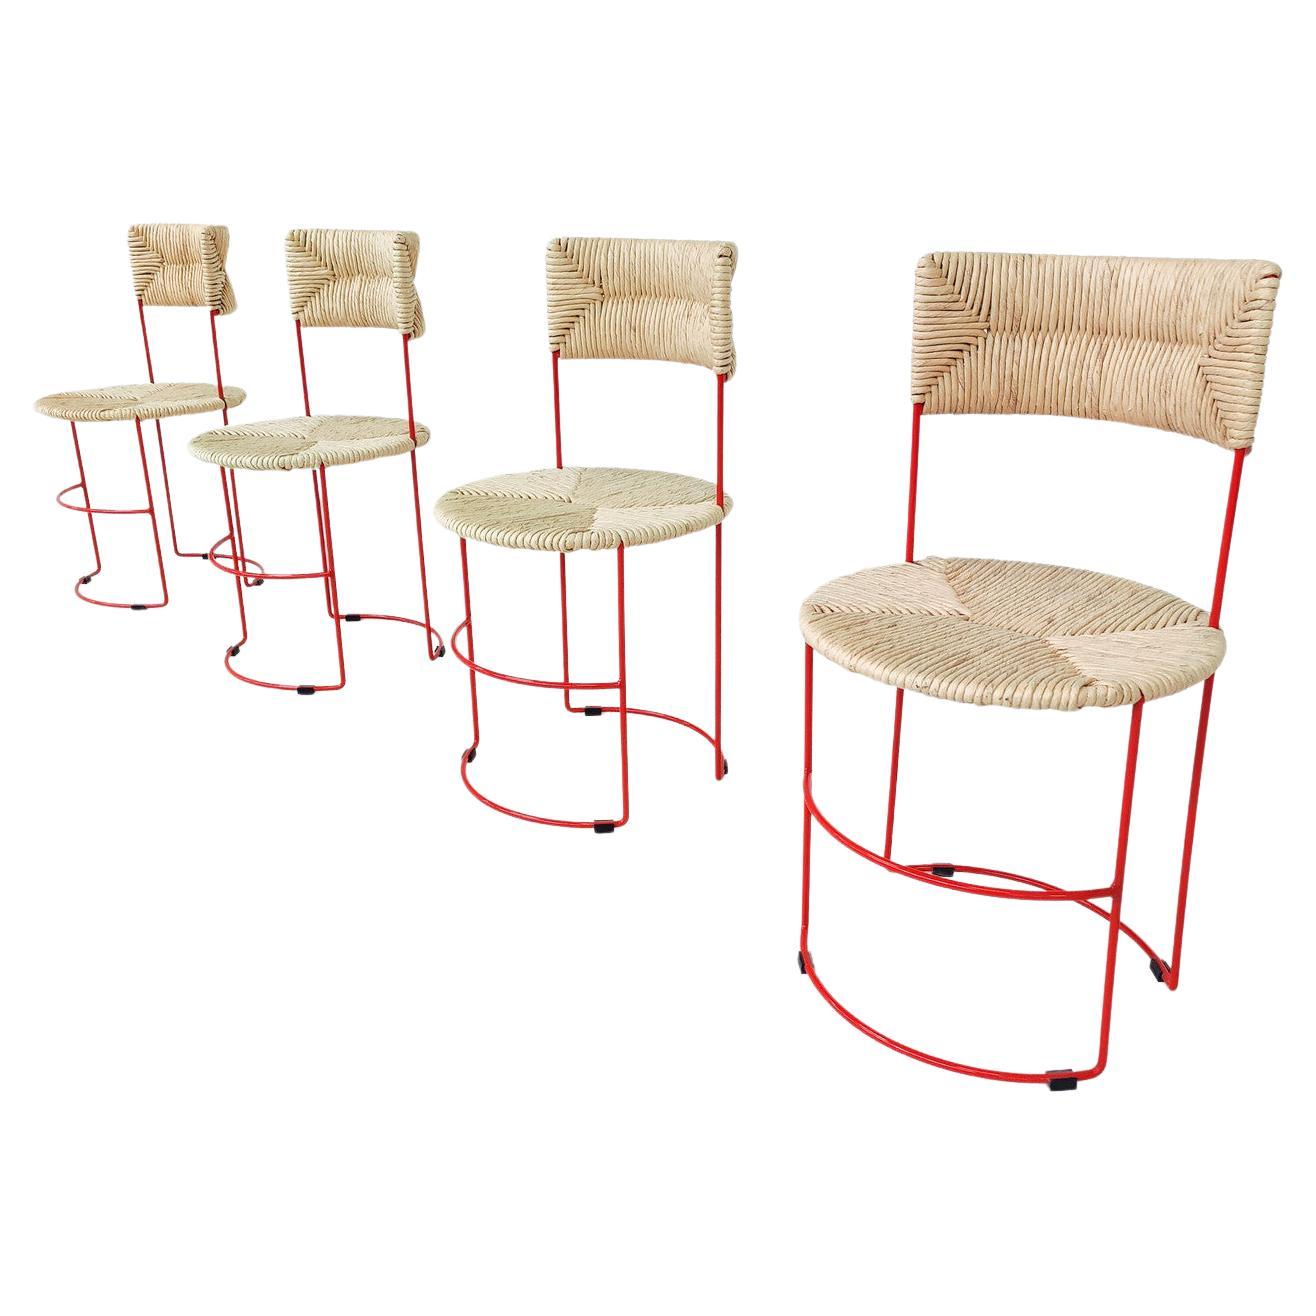 Mid-Century Modern Set of 4 Chairs by Laura de Lorenzo & Stefano Stefani For Sale